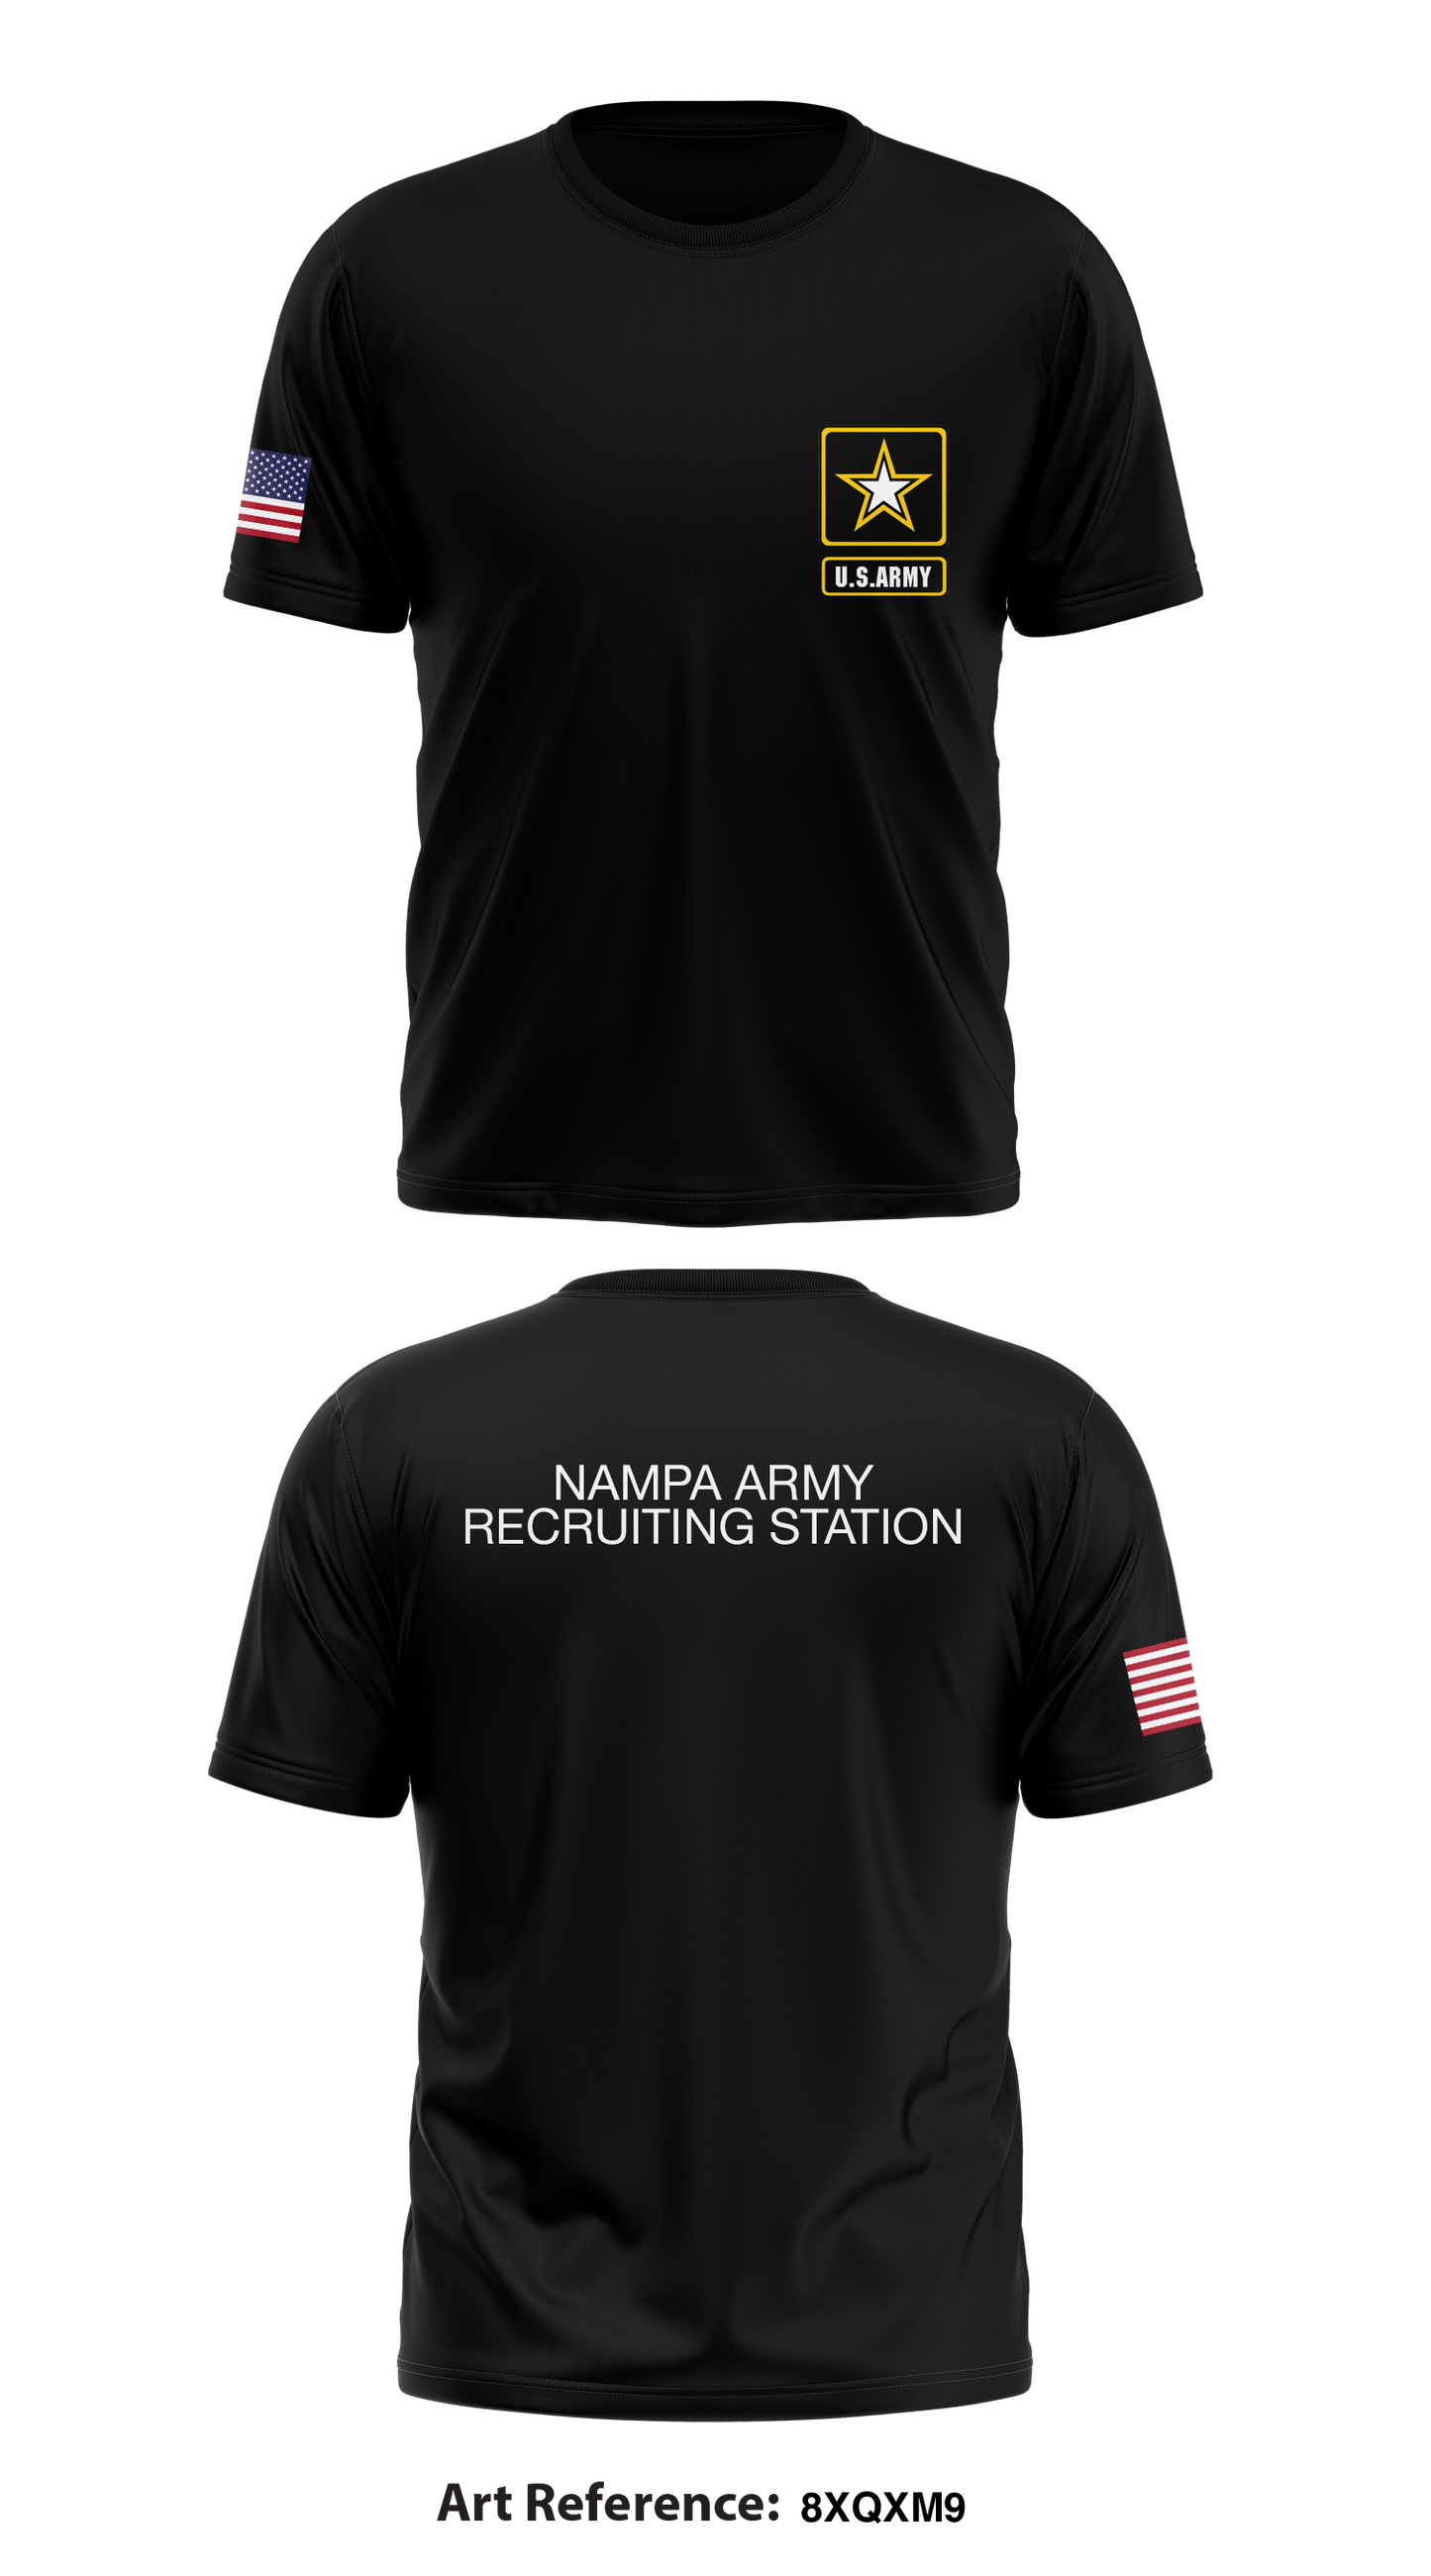 Nampa Army Recruiting Station Store 1 Core Men's SS Performance Tee - 8Xqxm9